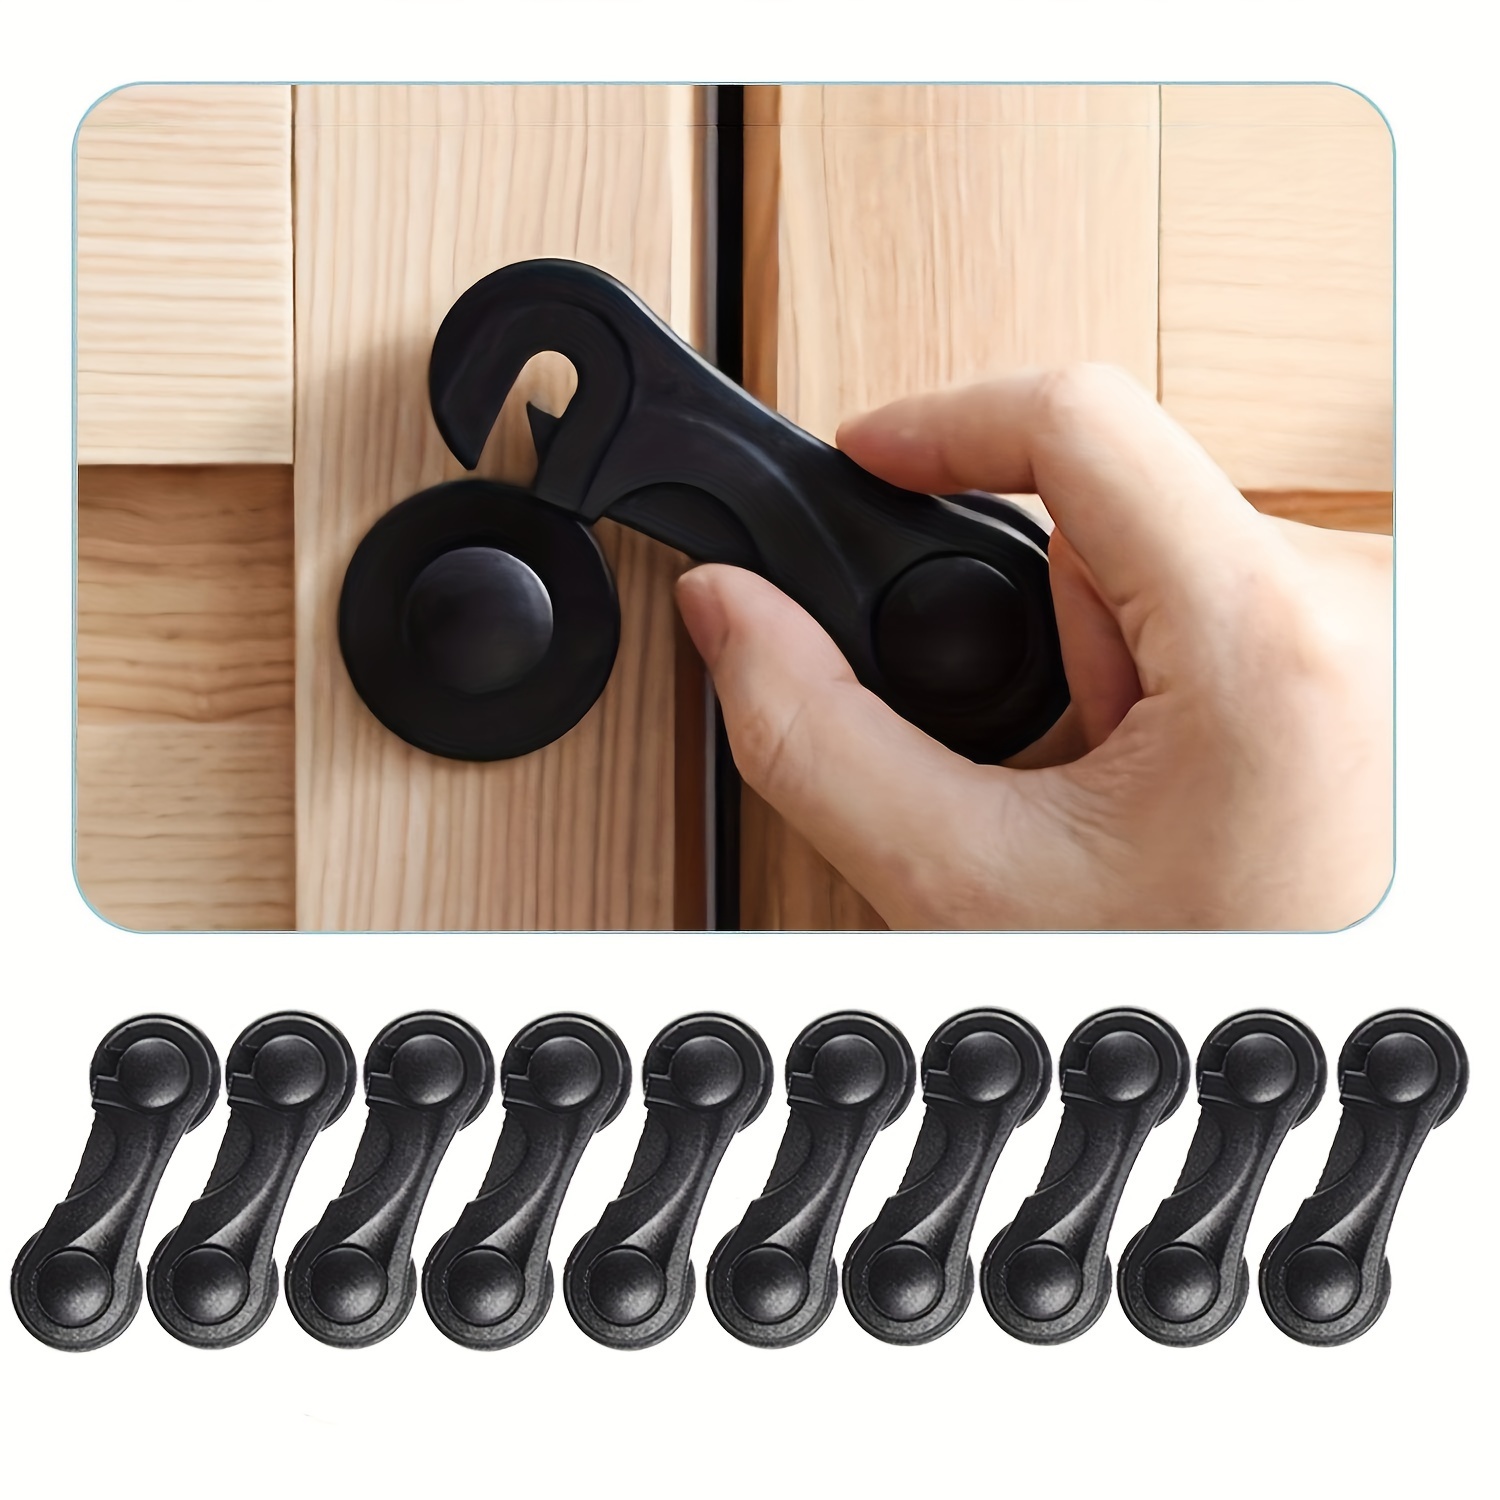 Refrigerator Door Locks, Fridge Lock with Keys, File Drawer and Child  Safety Cabinet Lock with Strong Adhesive